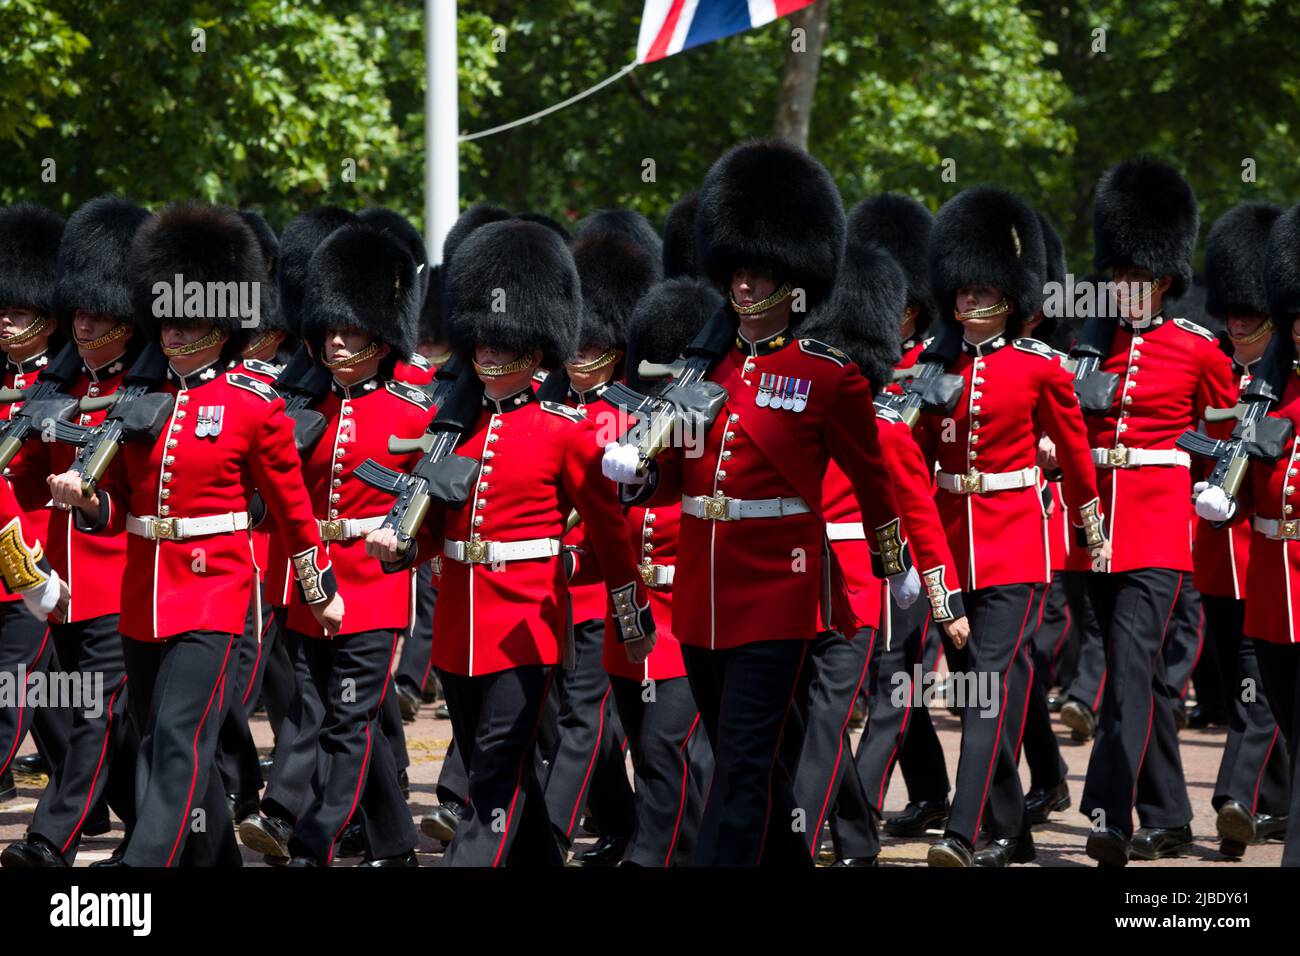 Grenadier Guardsmen Parading The Queen's Platinum Jubilee Trooping The Colour Color The Mall London Stock Photo